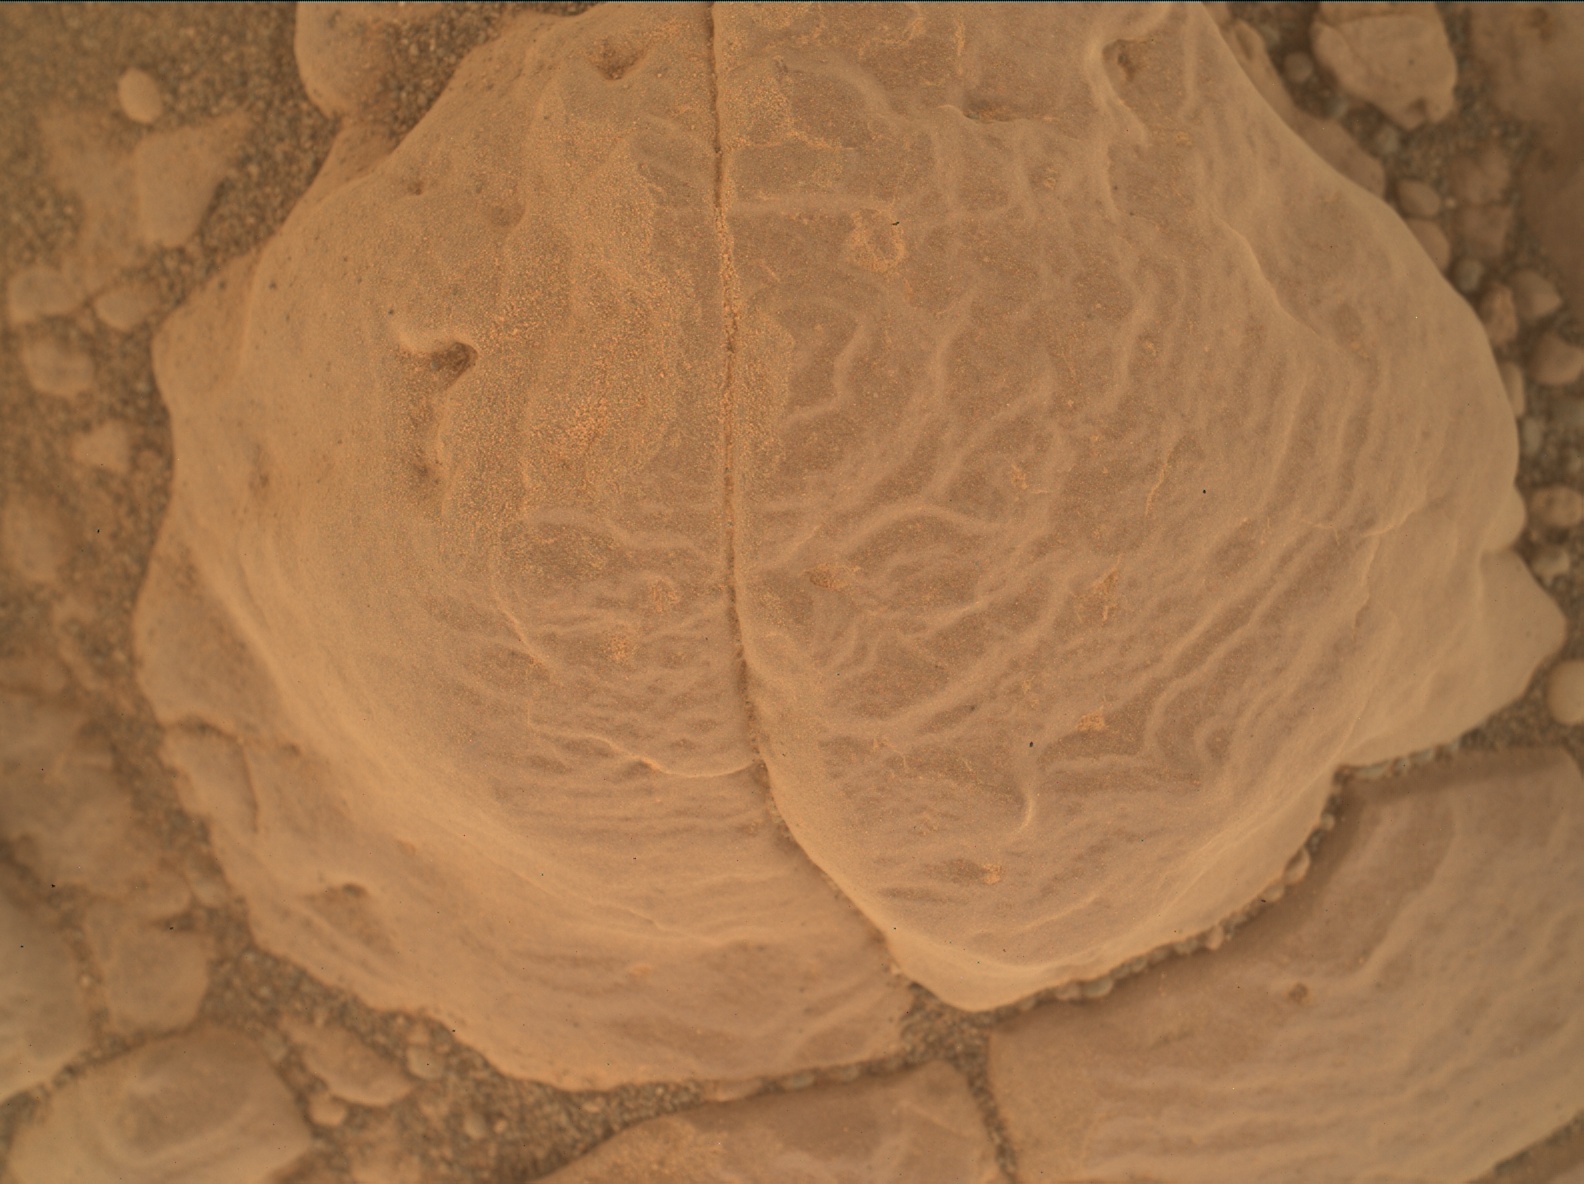 Nasa's Mars rover Curiosity acquired this image using its Mars Hand Lens Imager (MAHLI) on Sol 2304